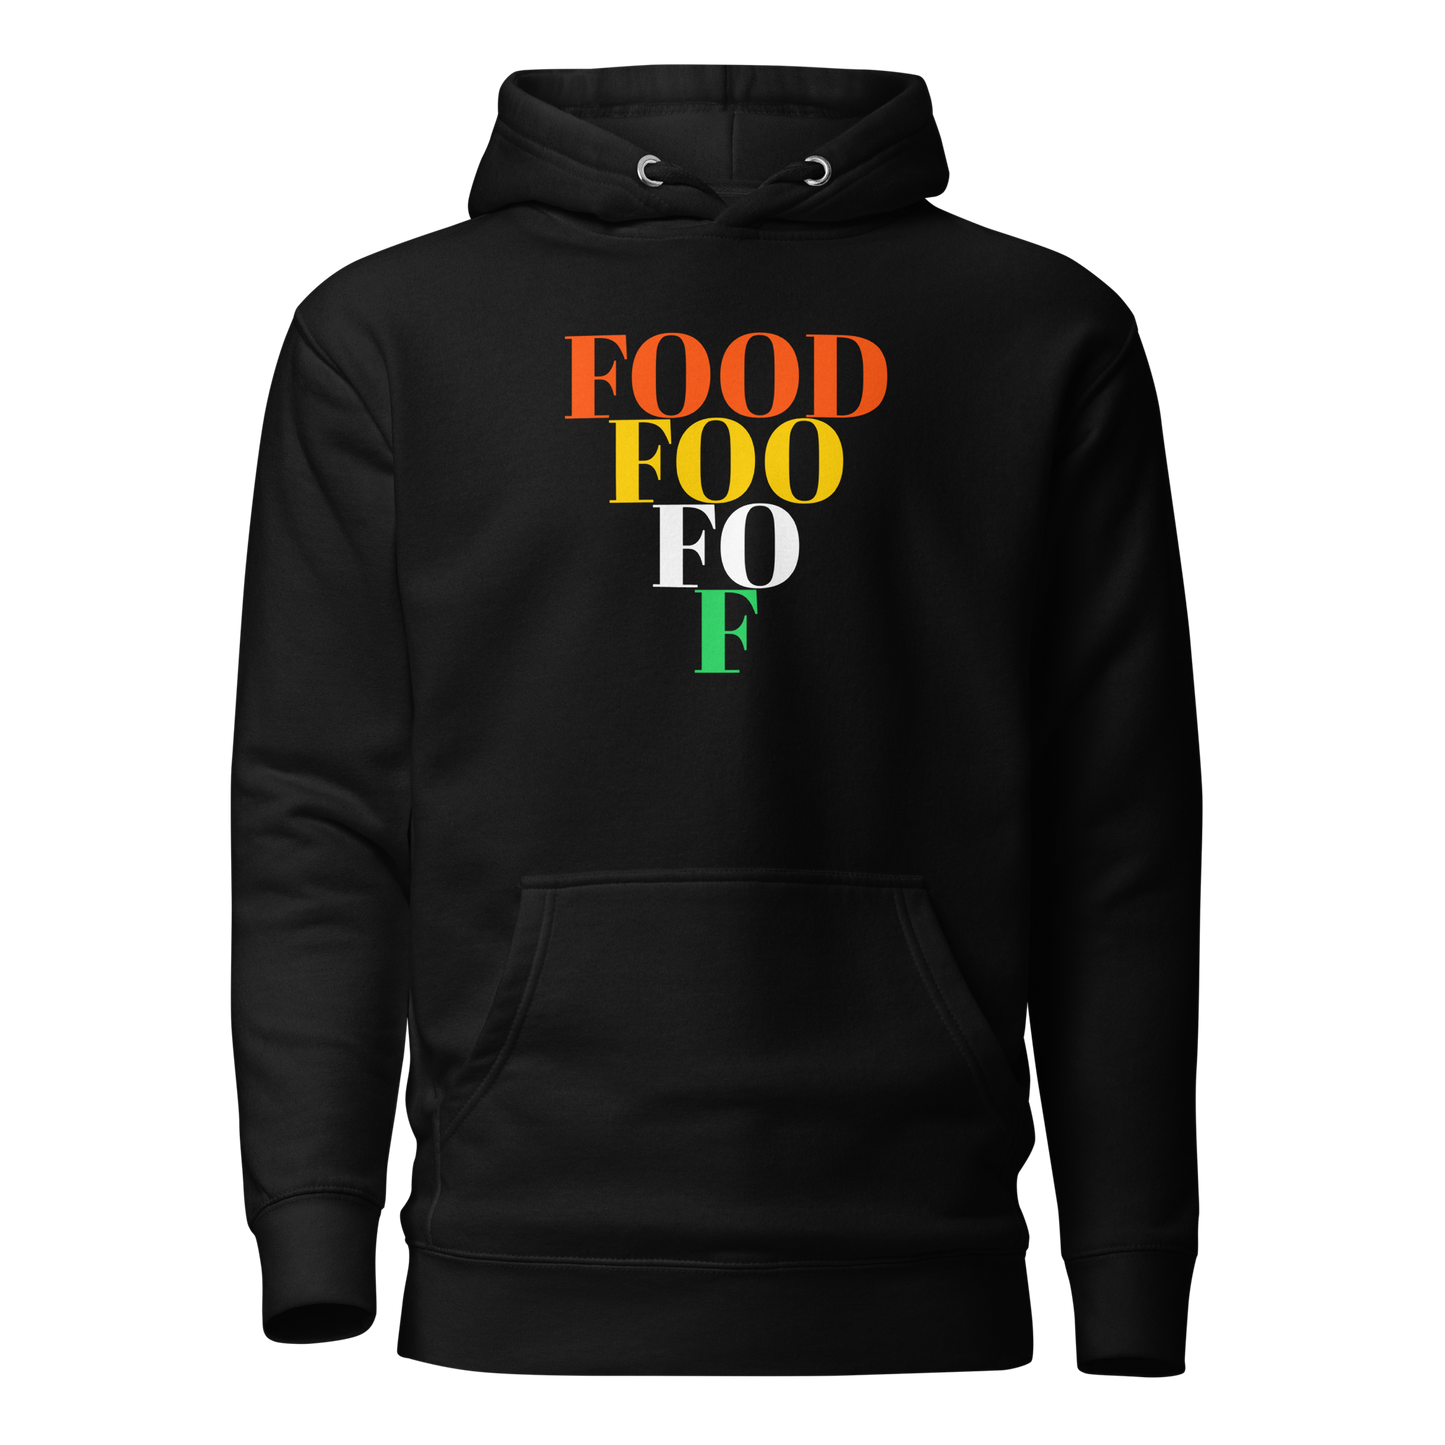 “Food Pyramid” Unisex Relaxed Hoodie